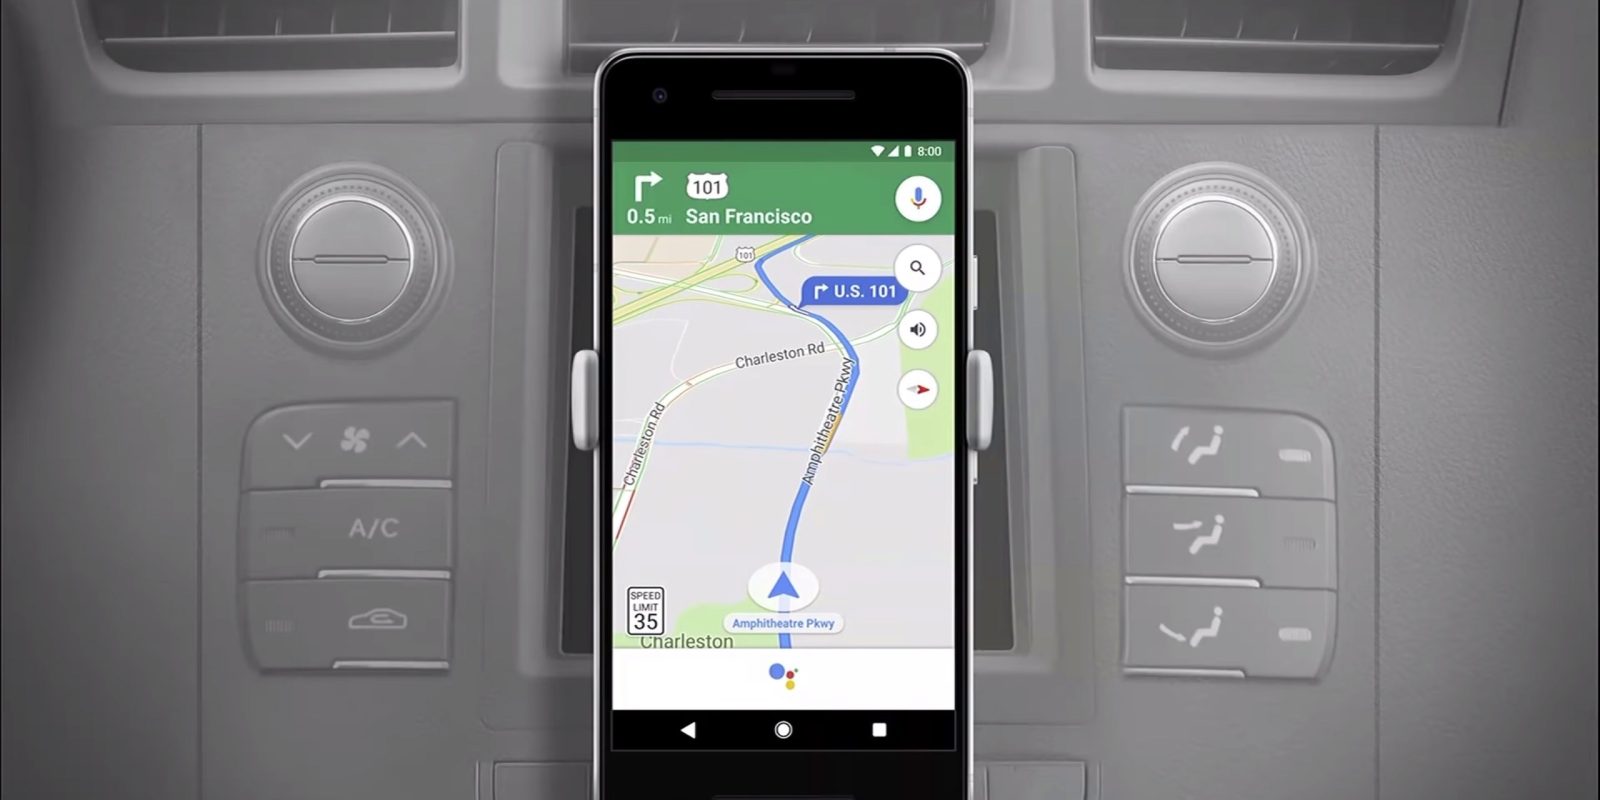 Easy steps to use Google Assistant with Google Maps